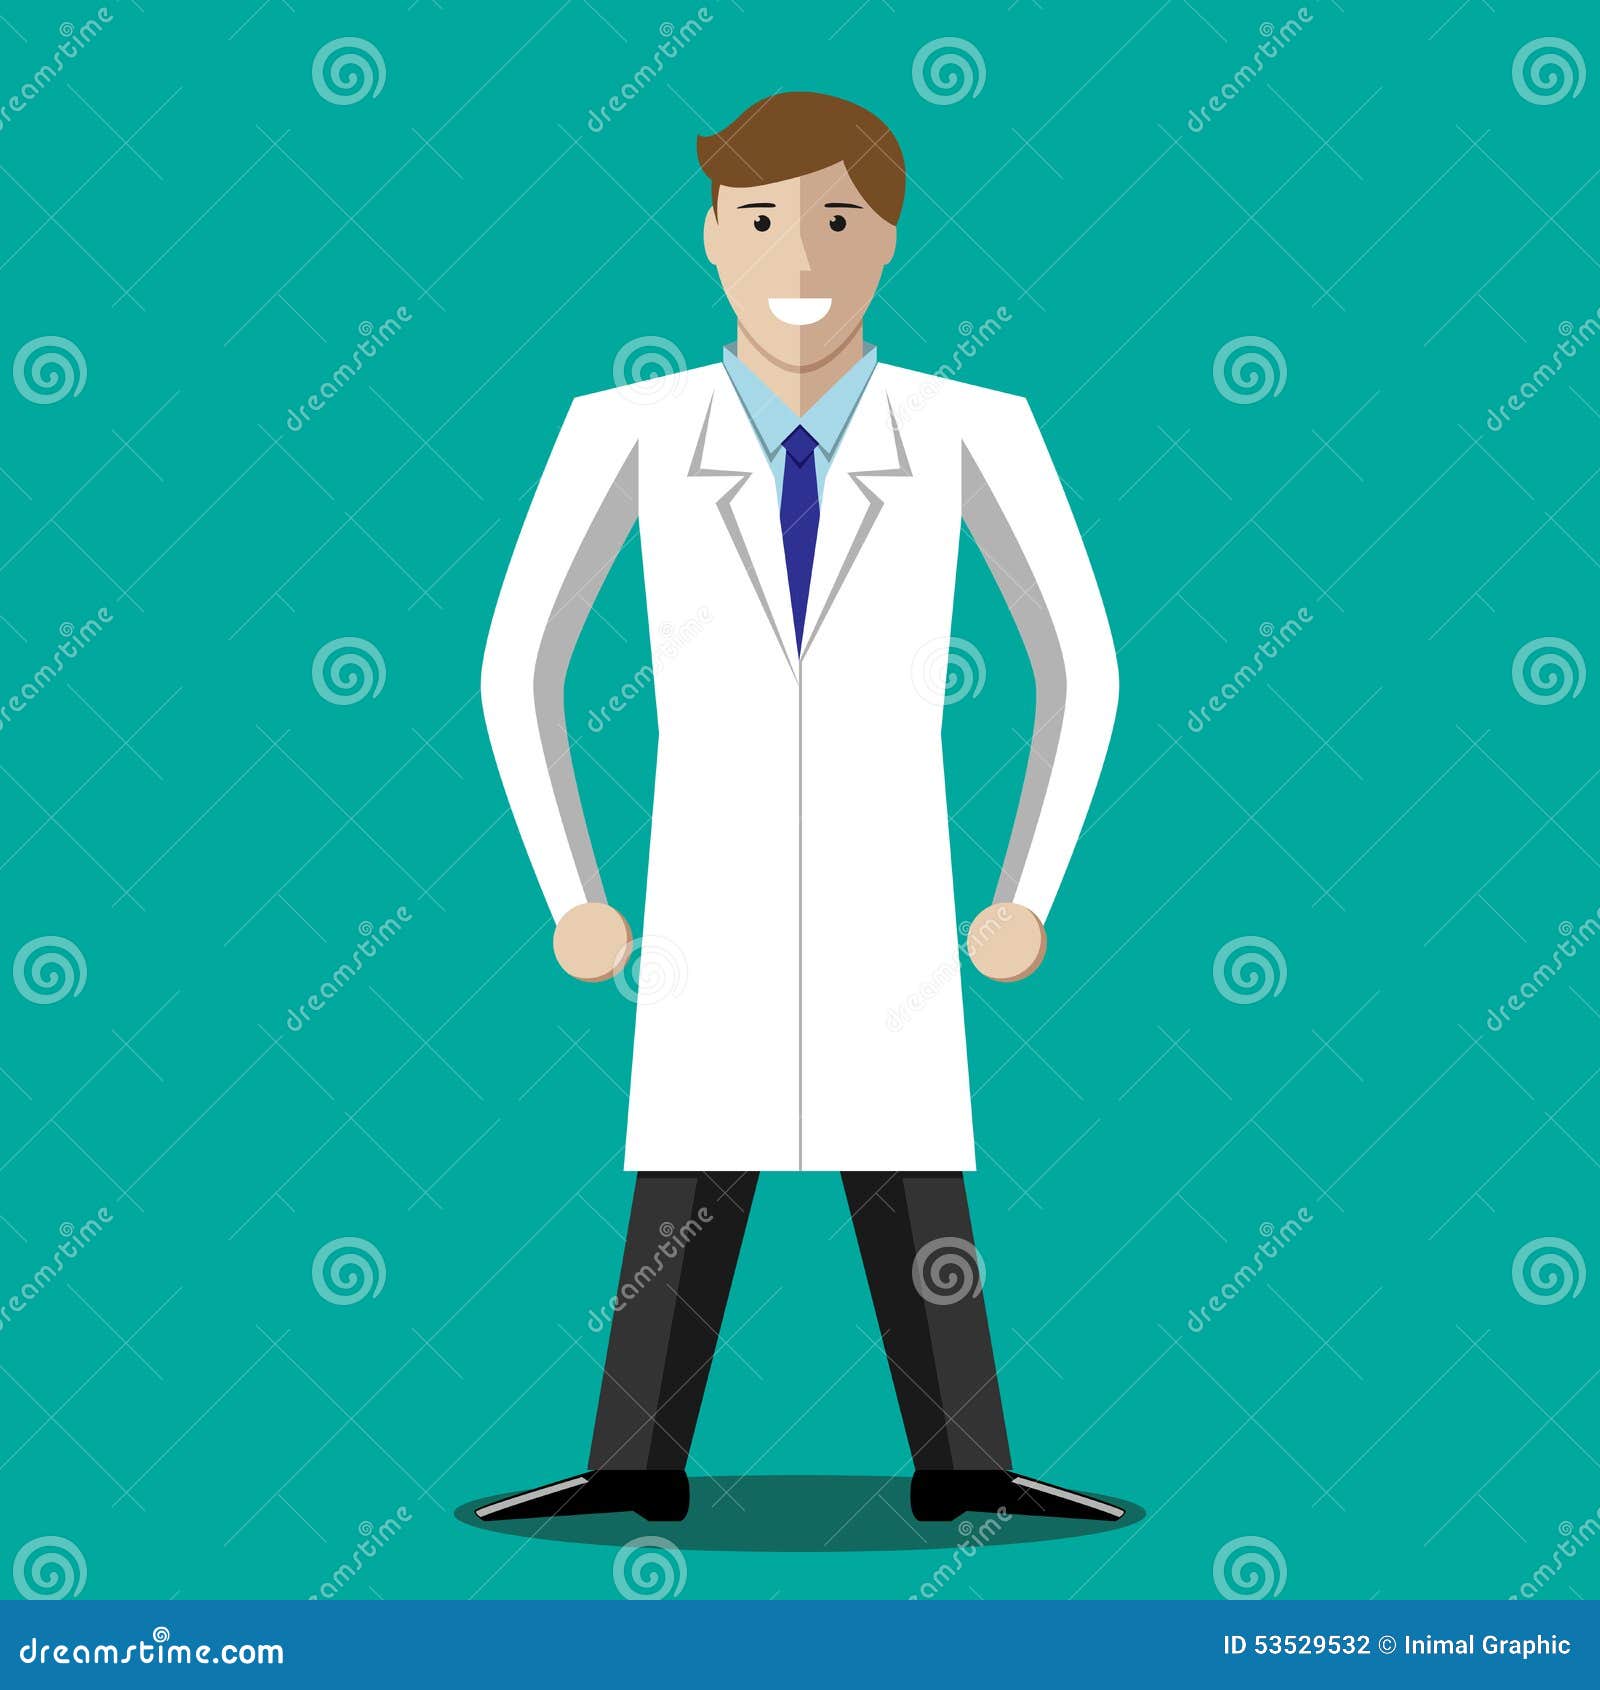 Successful young scientist stock vector. Illustration of caucasian ...